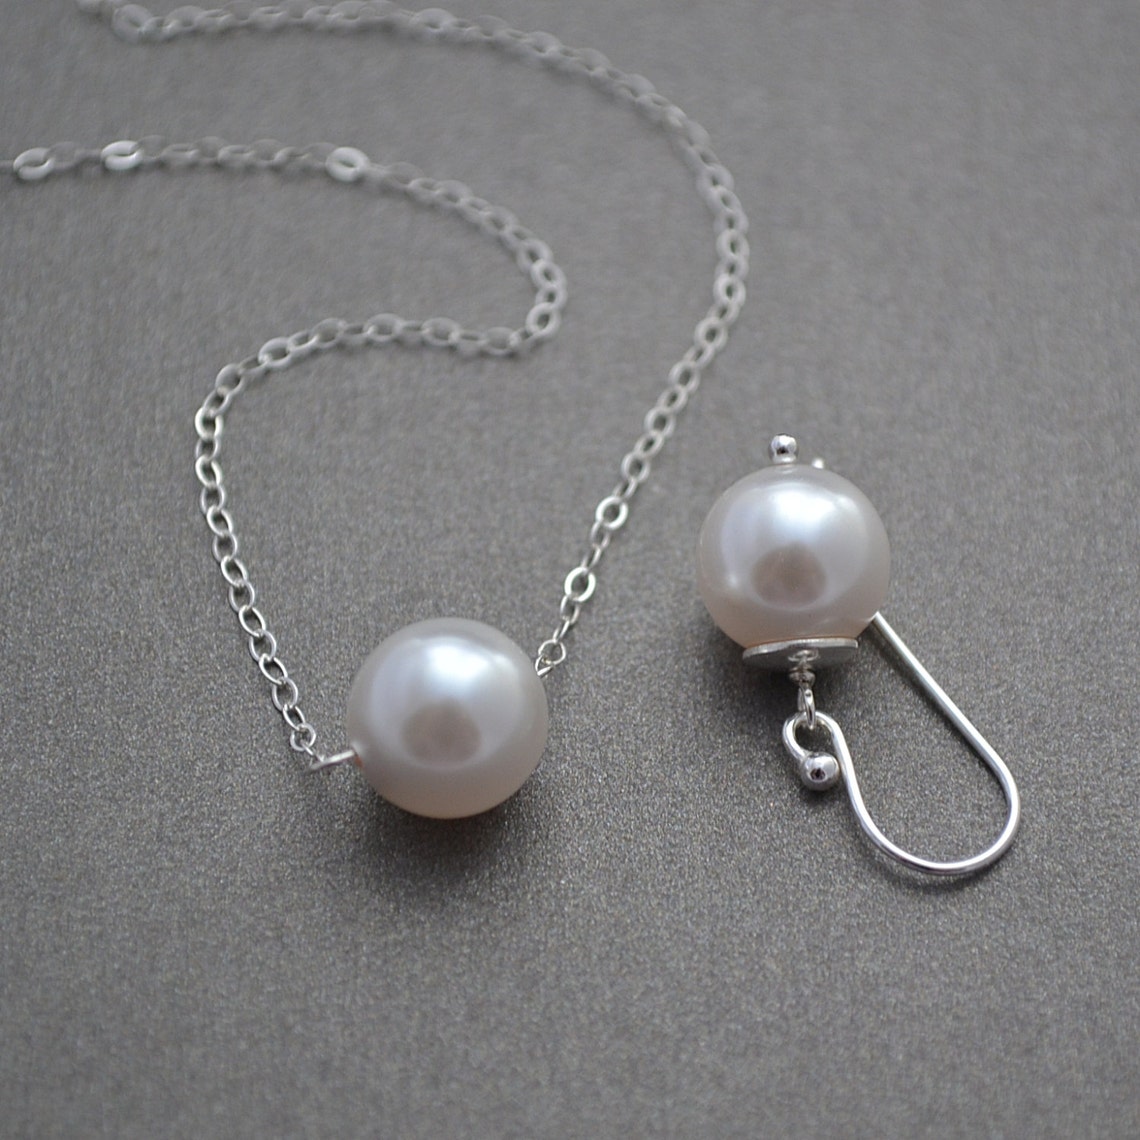 Single Pearl Necklace Bridesmaid Gift Single Pearl Necklace Etsy